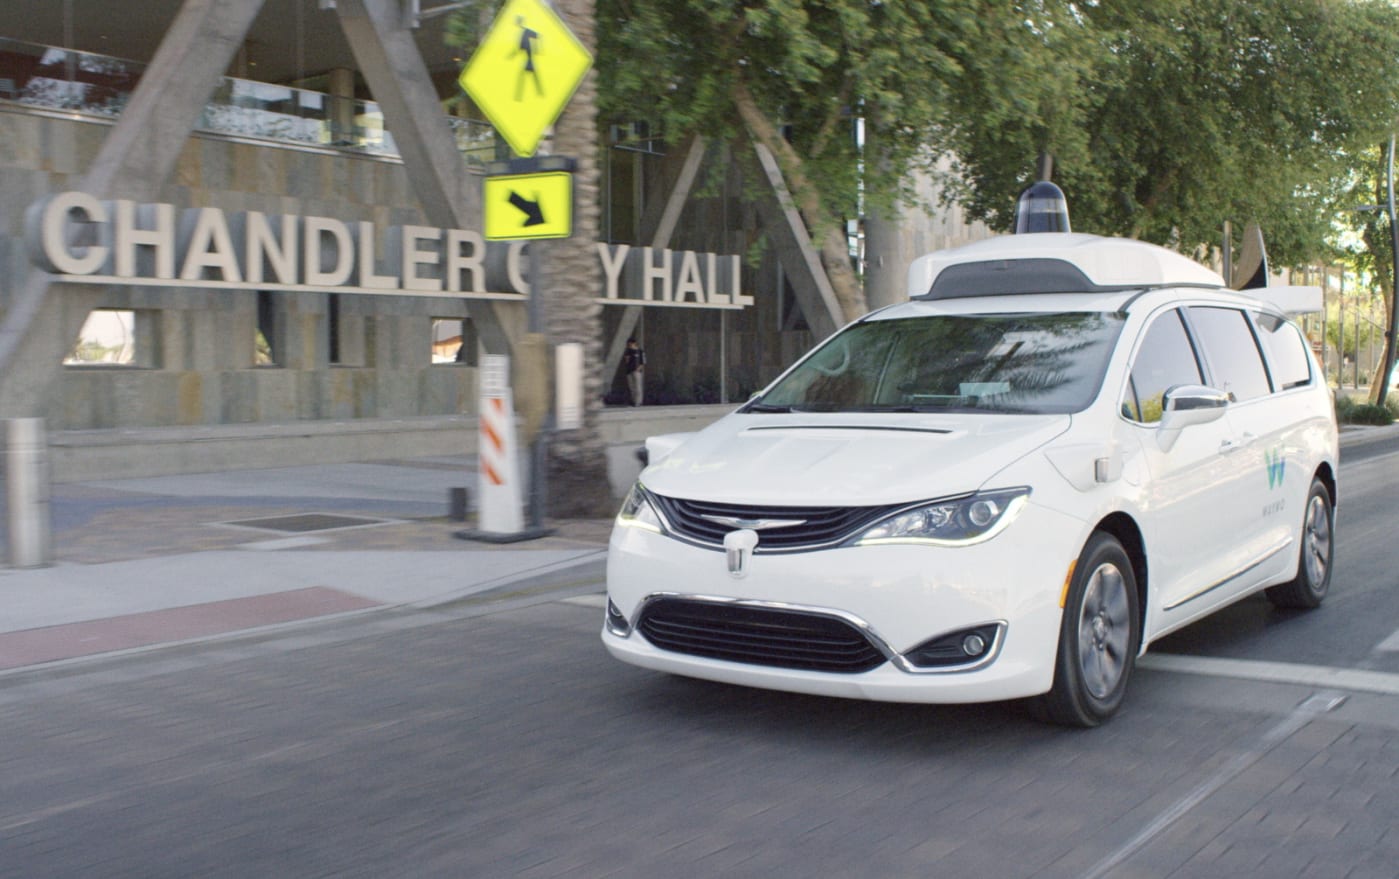 Waymo's self-driving vehicles are now doing Uber Eats deliveries in Phoenix